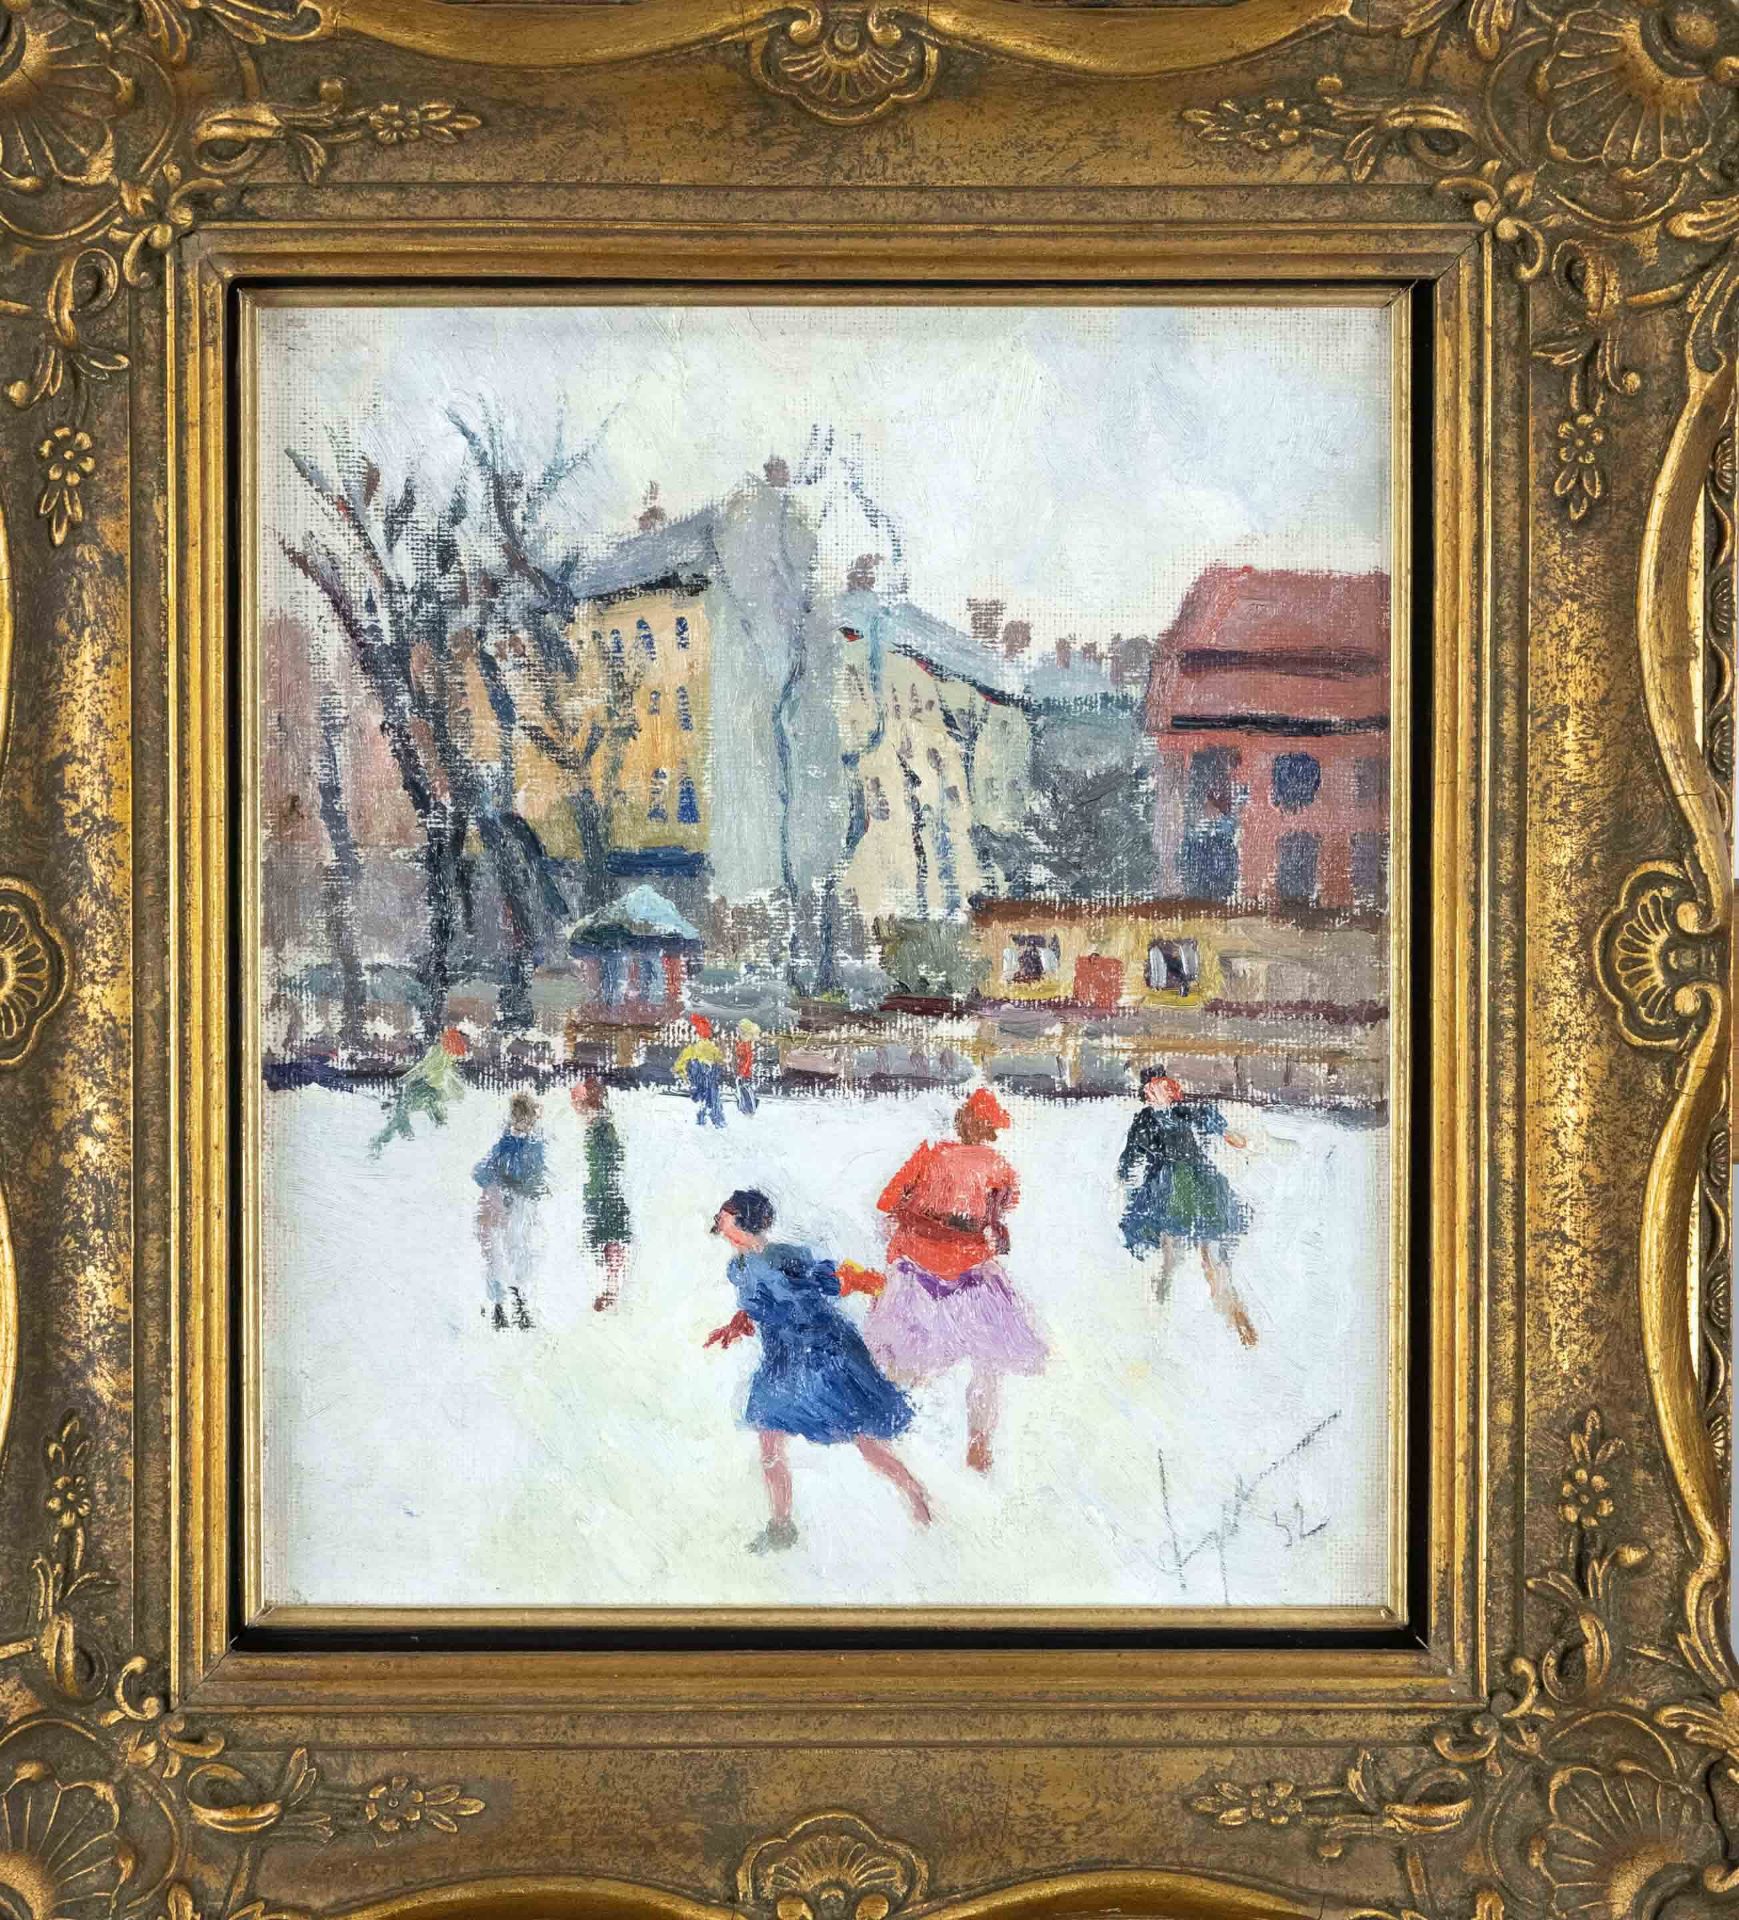 Unidentified Impressionist c. 1930, Children skating in an urban environment, oil on canvas,